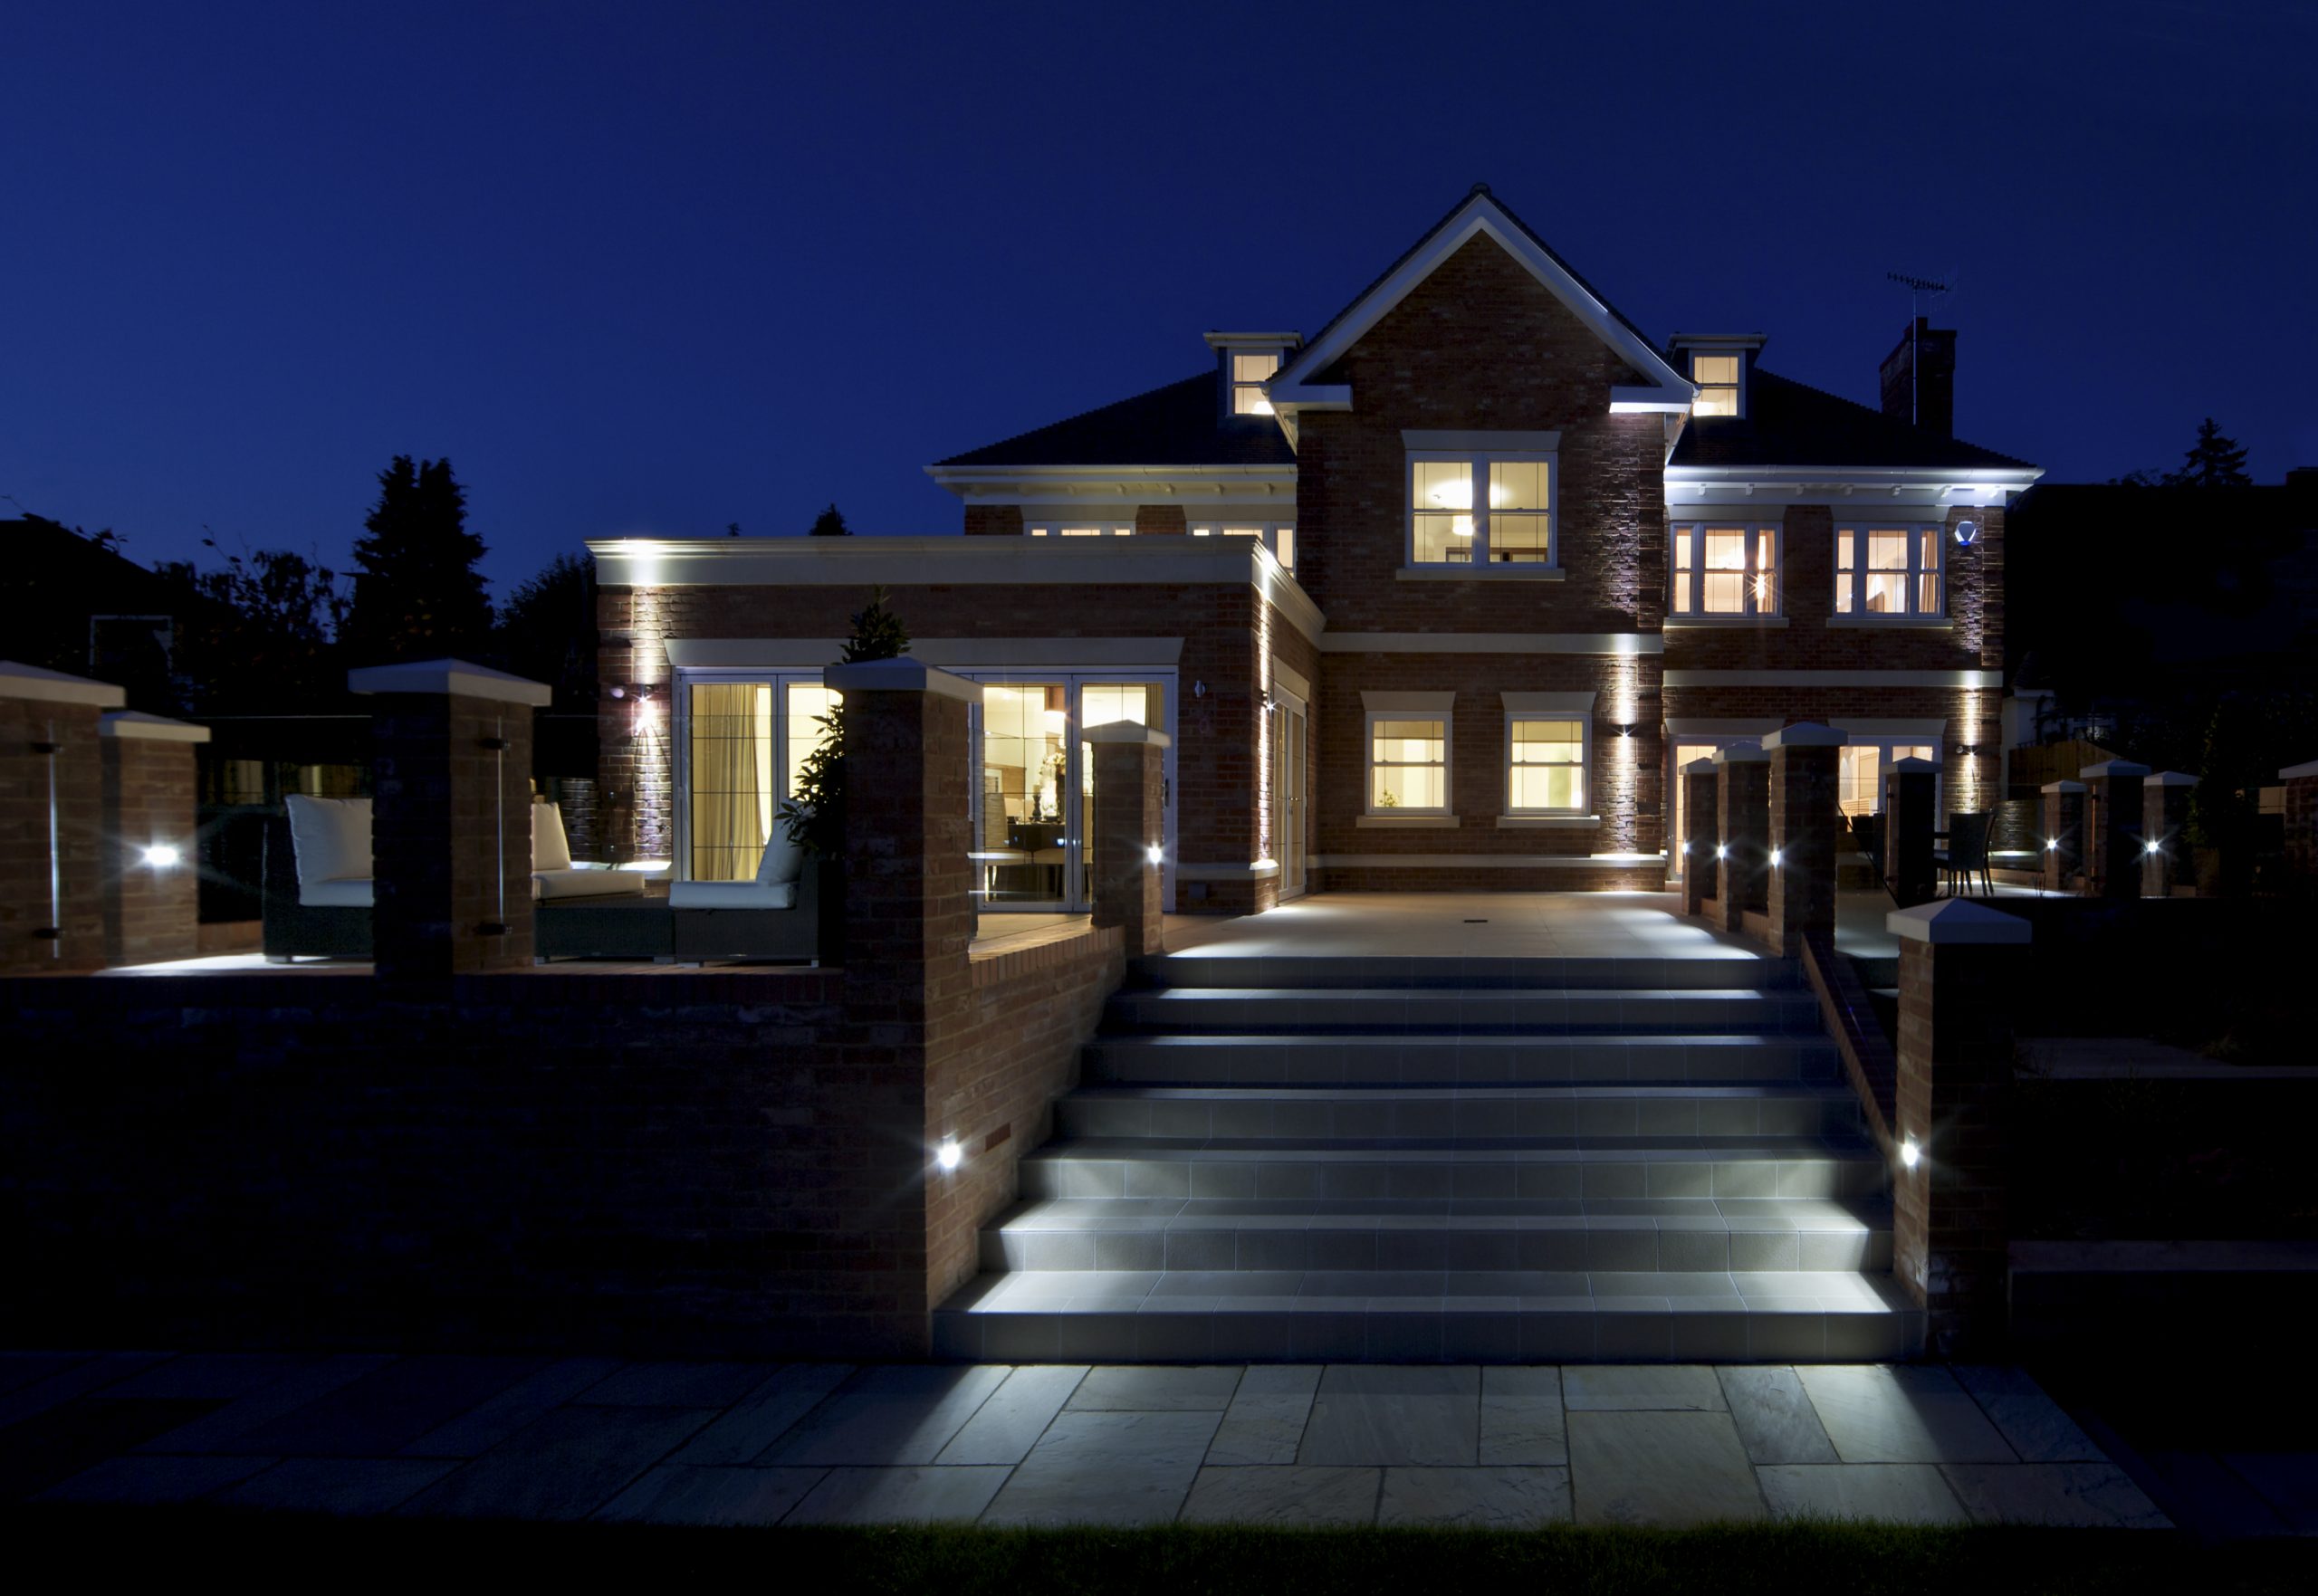 Rear of house with outside lighting and house lights on. Lighting controlled with a system that has had an upgrade to Lutron Homeworks QS.